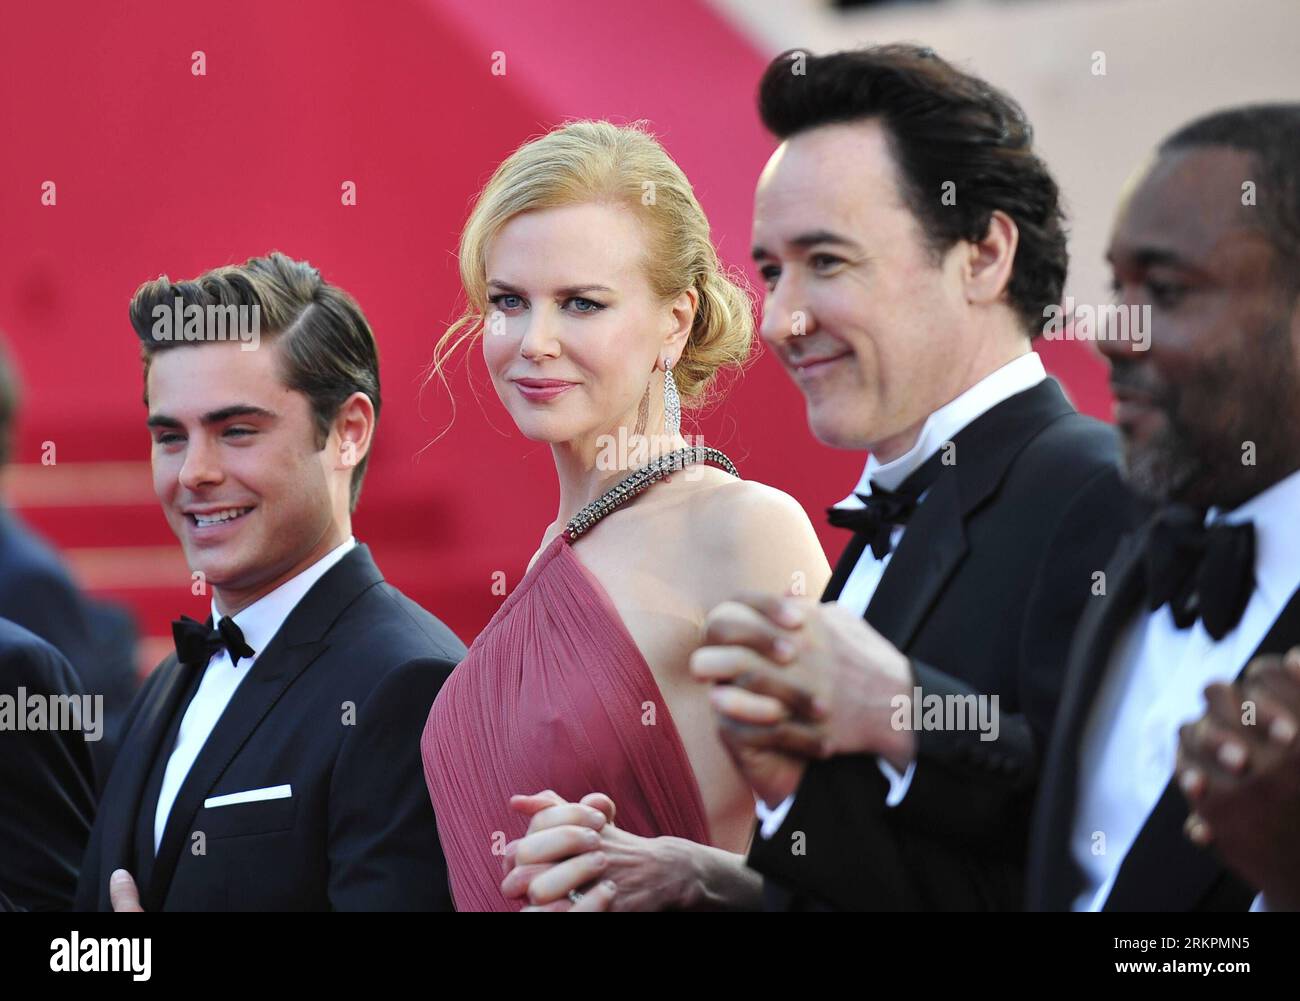 Bildnummer: 58027677  Datum: 24.05.2012  Copyright: imago/Xinhua (120524) -- CANNES, May 24, 2012 (Xinhua) -- (L to R) Cast members of The Paperboy , U.S. actor Zac Efron, Australian actress Nicole Kidman, U.S. actor John Cusack and U.S. director Lee Daniels arrive for its premiere at the 65th Cannes Film Festival in Cannes, southern France, May 24, 2012. (Xinhua/Ye Pingfan) FRANCE-CANNES-FILM FESTIVAL-PREMIERE-PAPERBOY PUBLICATIONxNOTxINxCHN Kultur Entertainment People Film 65. Internationale Filmfestspiele Cannes Filmpremiere Premiere x0x xub 2012 quer premiumd      58027677 Date 24 05 2012 Stock Photo